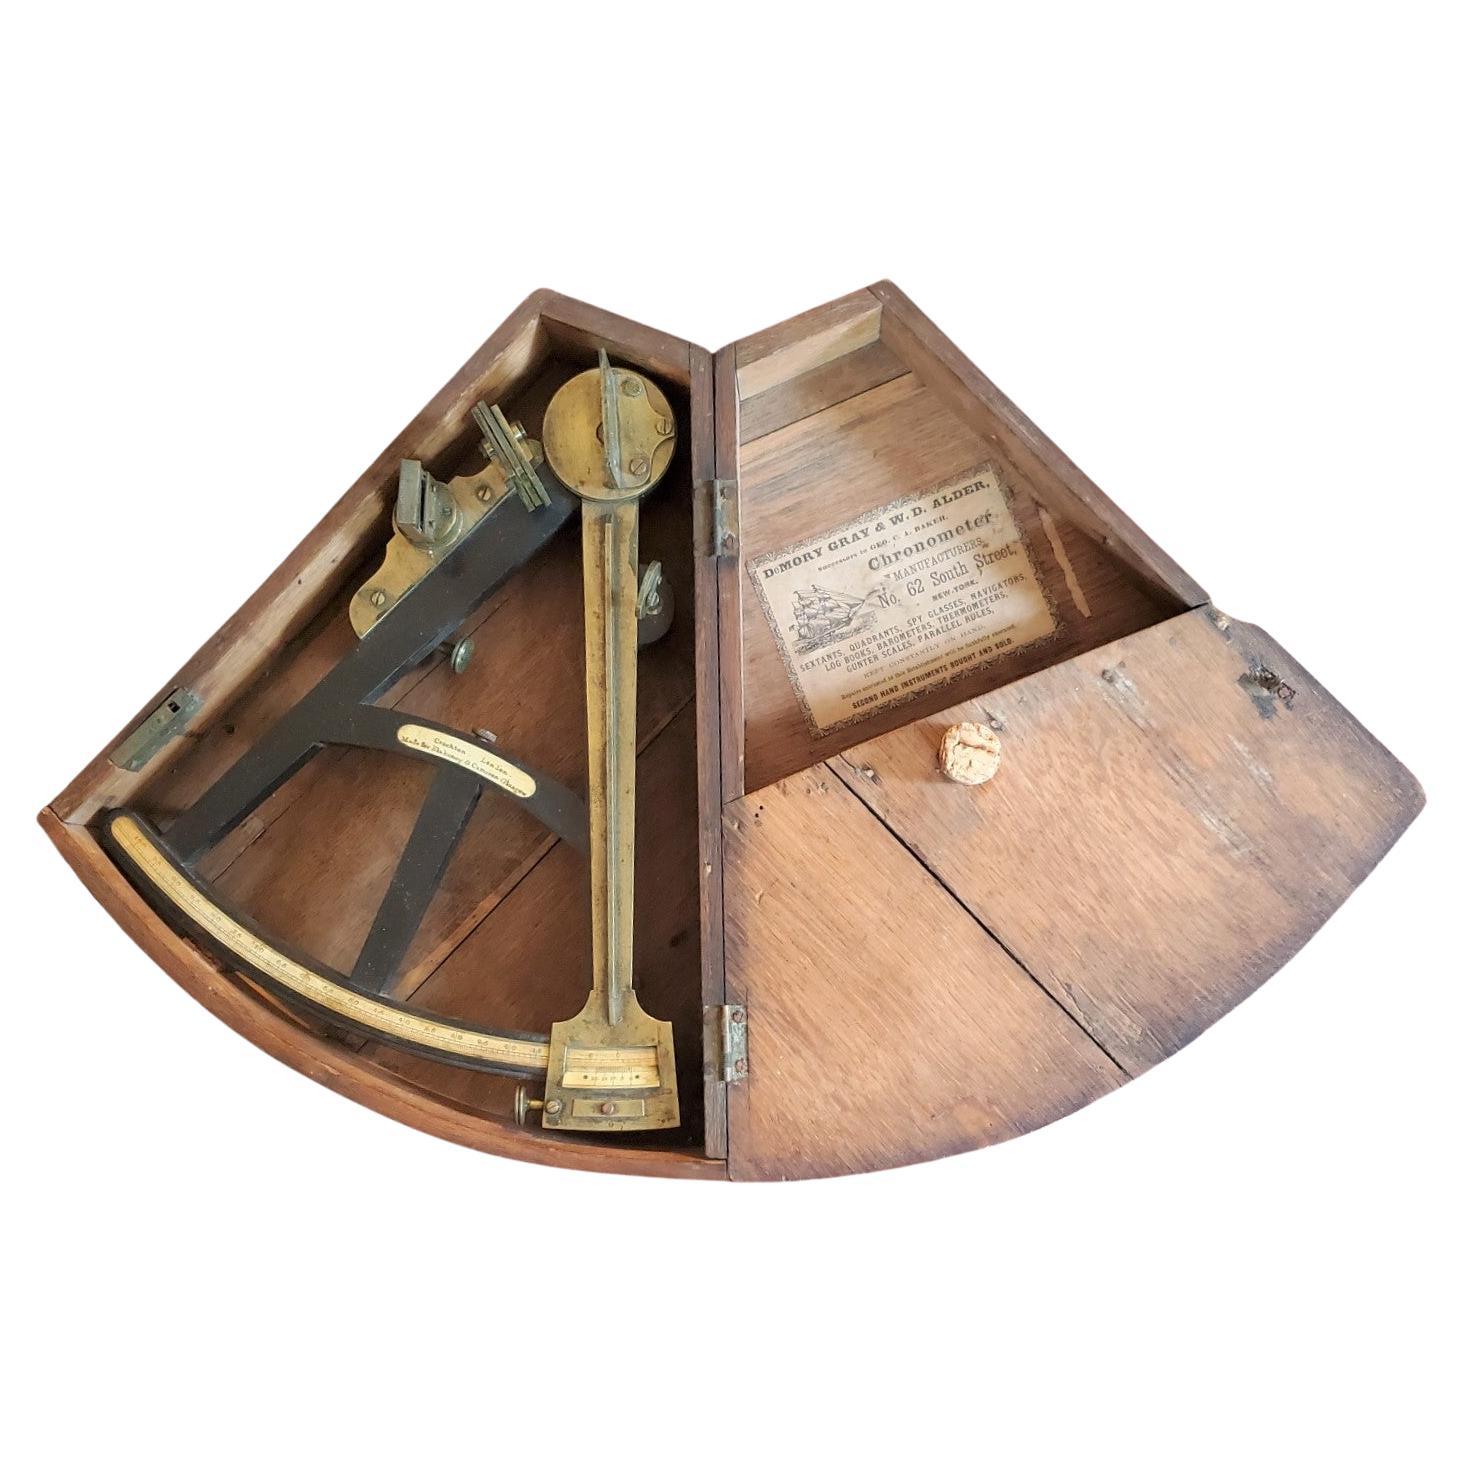 19th Century Naval Navigational Octant by Crichton 'London' in Original Case